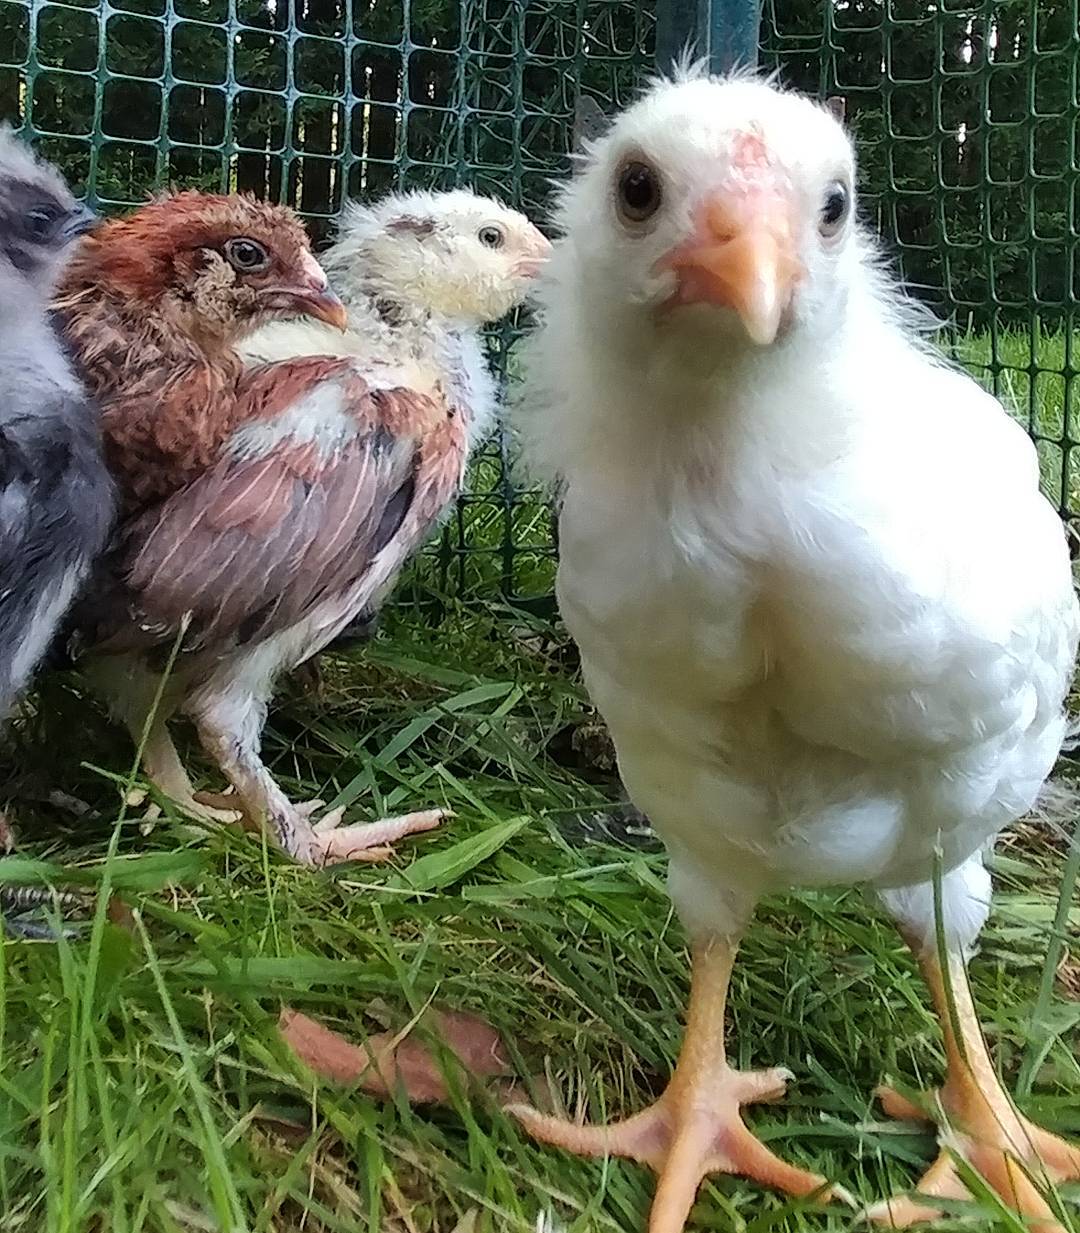 Argh! She is the cutest! And her pips are pretty adorable too! The babies now have a playpen in the backyard that I can sit in with them. They like me more when I'm not reaching into their brooder from above like a predator. Learned that from IG!